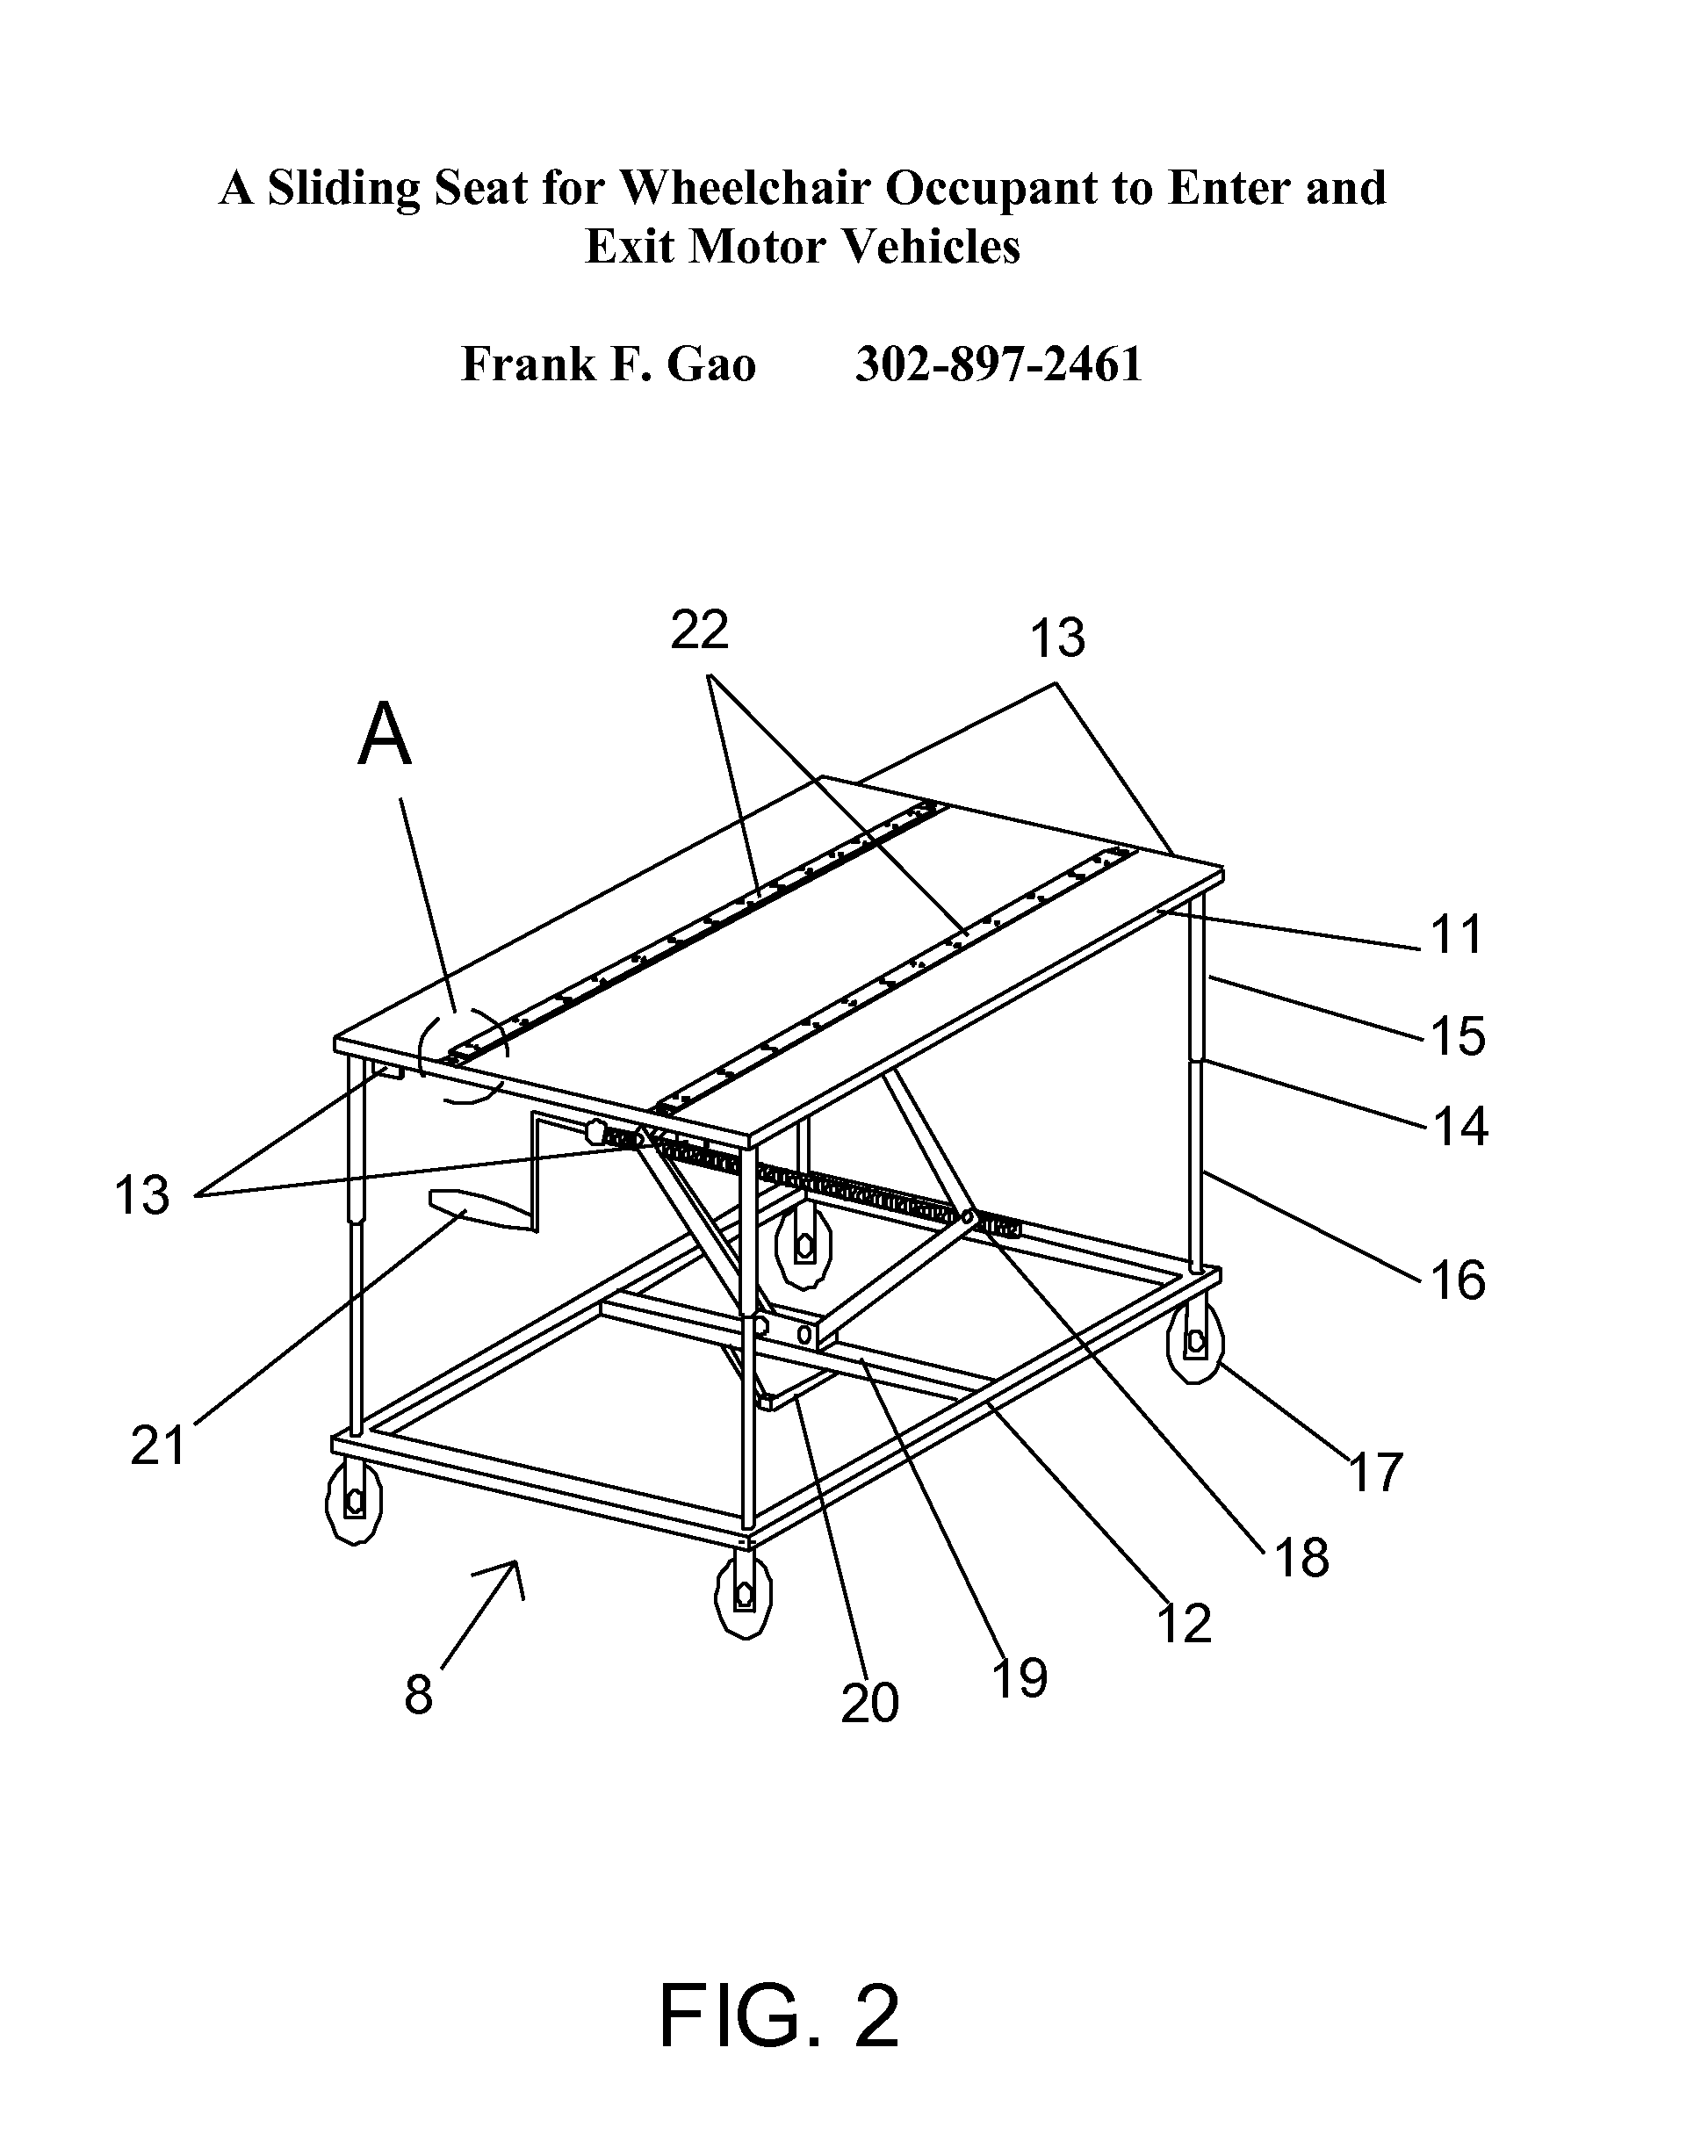 Sliding Seat for Wheelchair Occupant to Enter and Exit Motor Vehicles